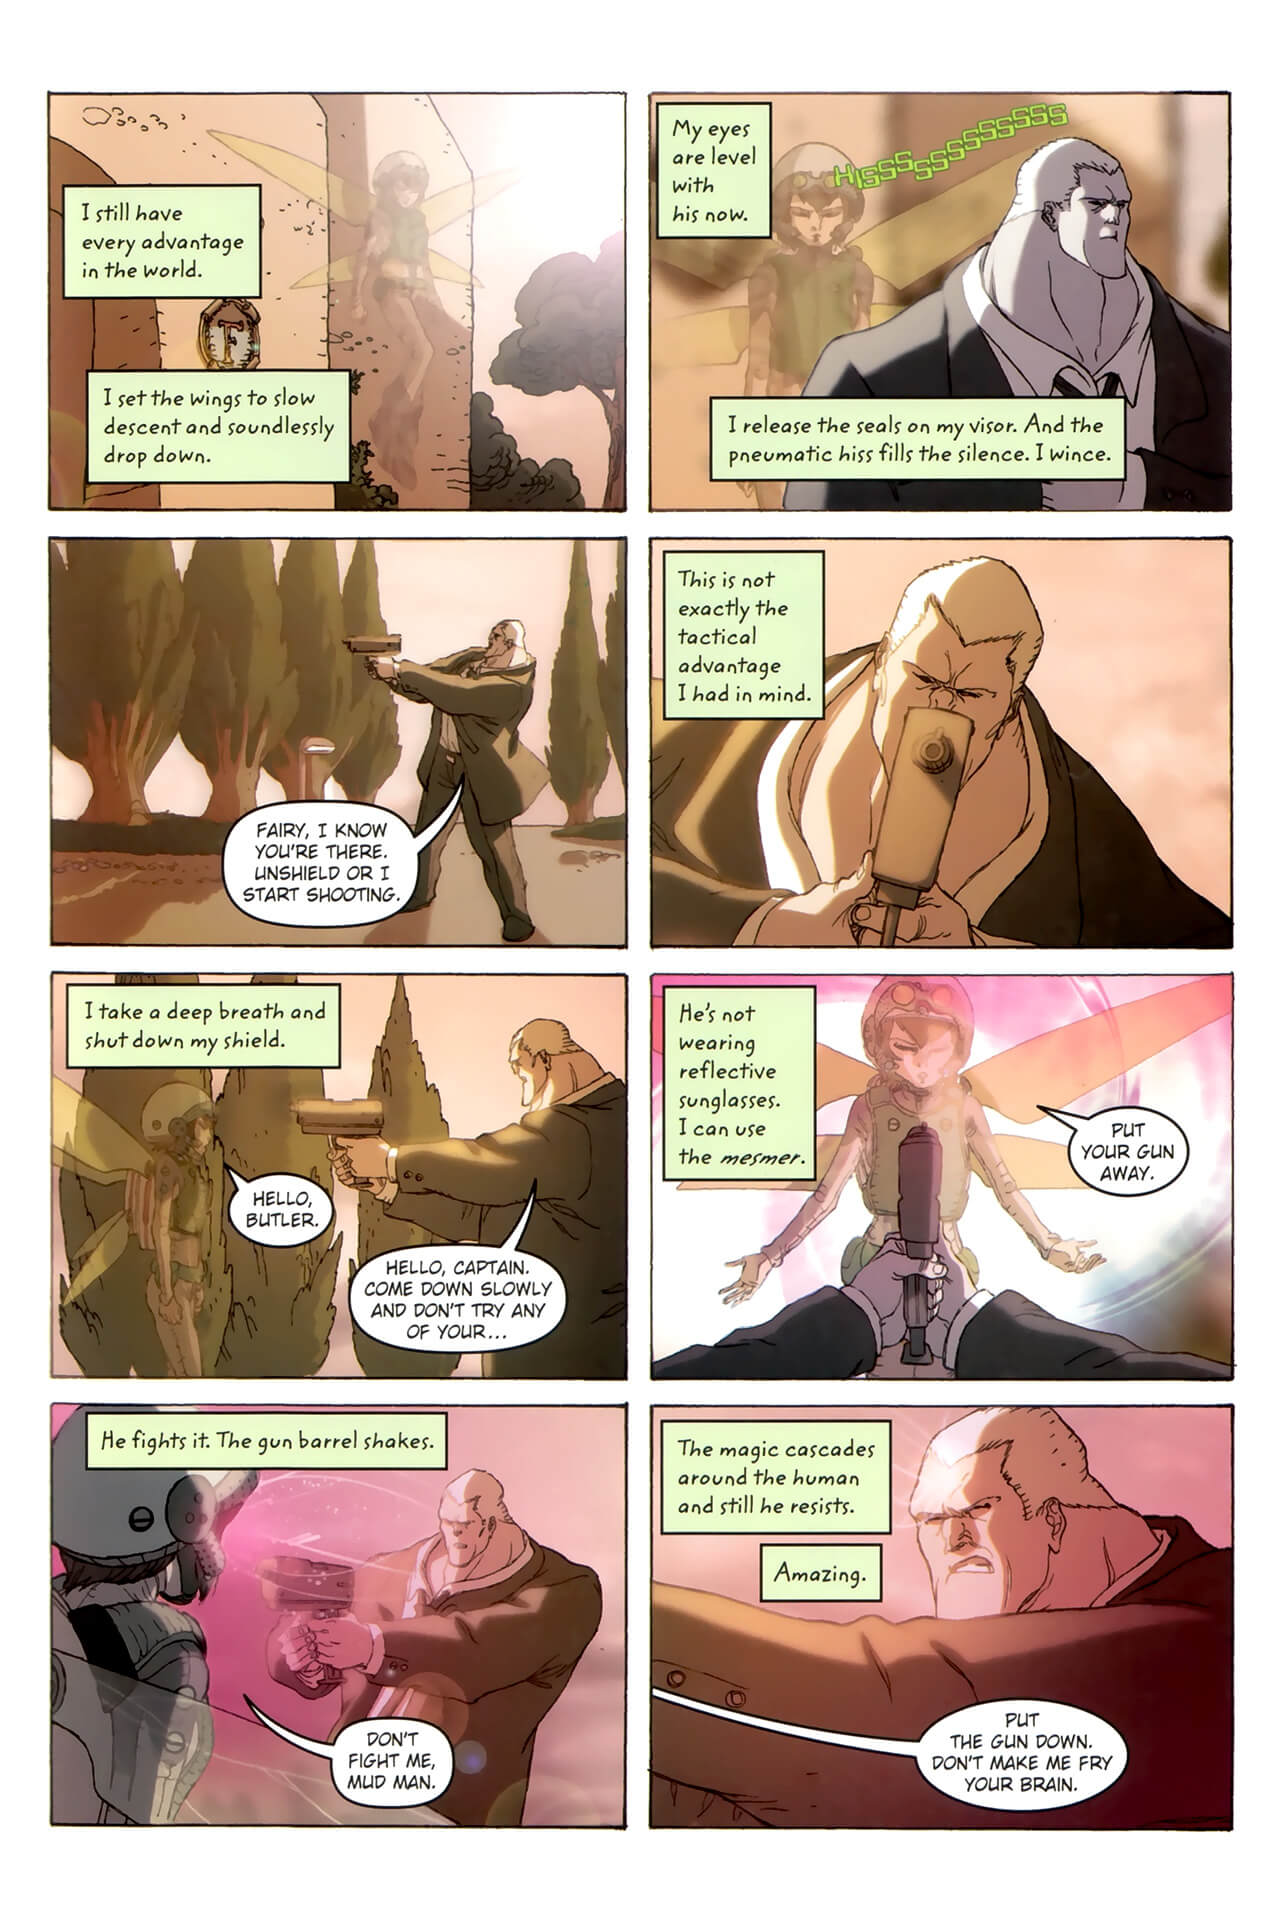 page 29 of artemis fowl the arctic incident graphic novel